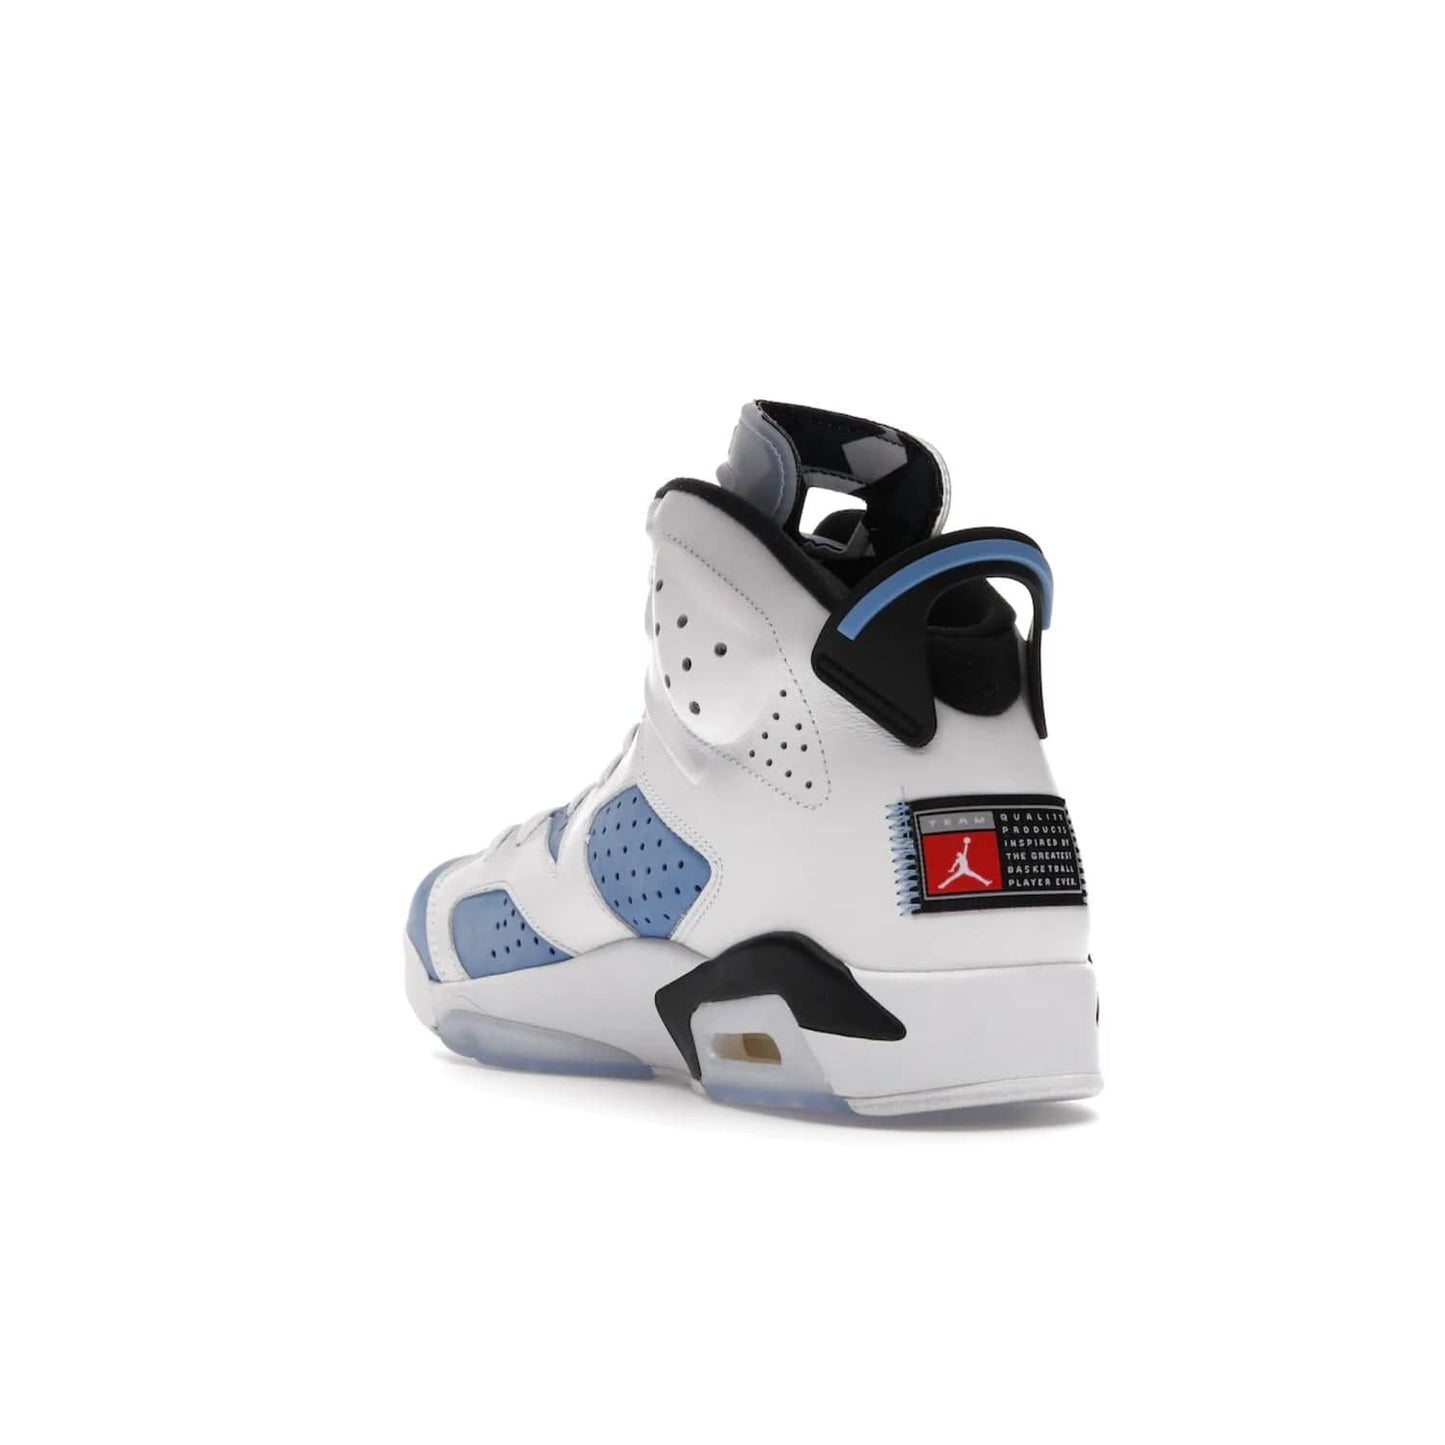 Jordan 6 Retro UNC White - Image 25 - Only at www.BallersClubKickz.com - Air Jordan 6 Retro UNC White with classic UNC colors brings nostalgia and style to a legendary silhouette. Celebrate MJ's alma mater with navy blue accents, icy semi-translucent sole and Jordan Team patch. Out March 2022 for the Sneaker Enthusiast.